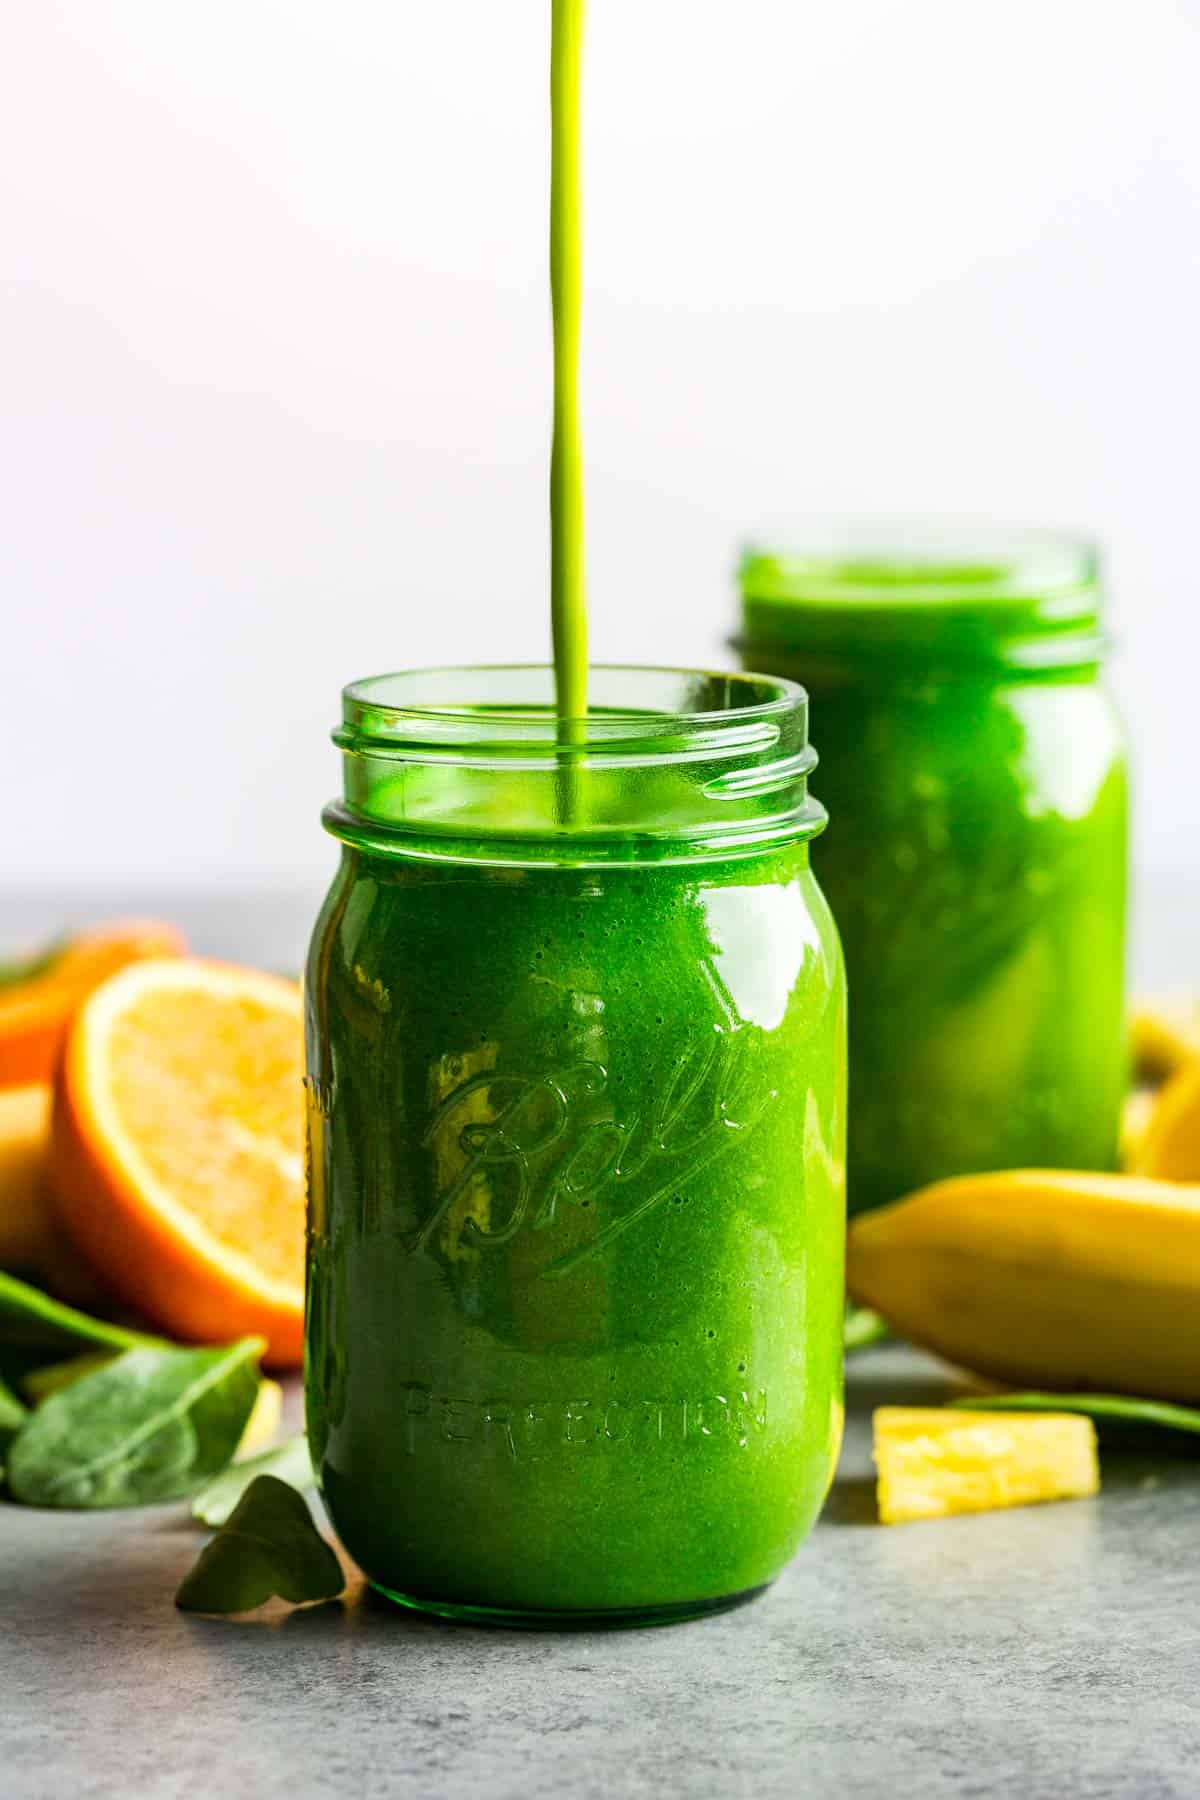 A stream of green smoothie being poured into a green jars with sliced oranges and banana around it.